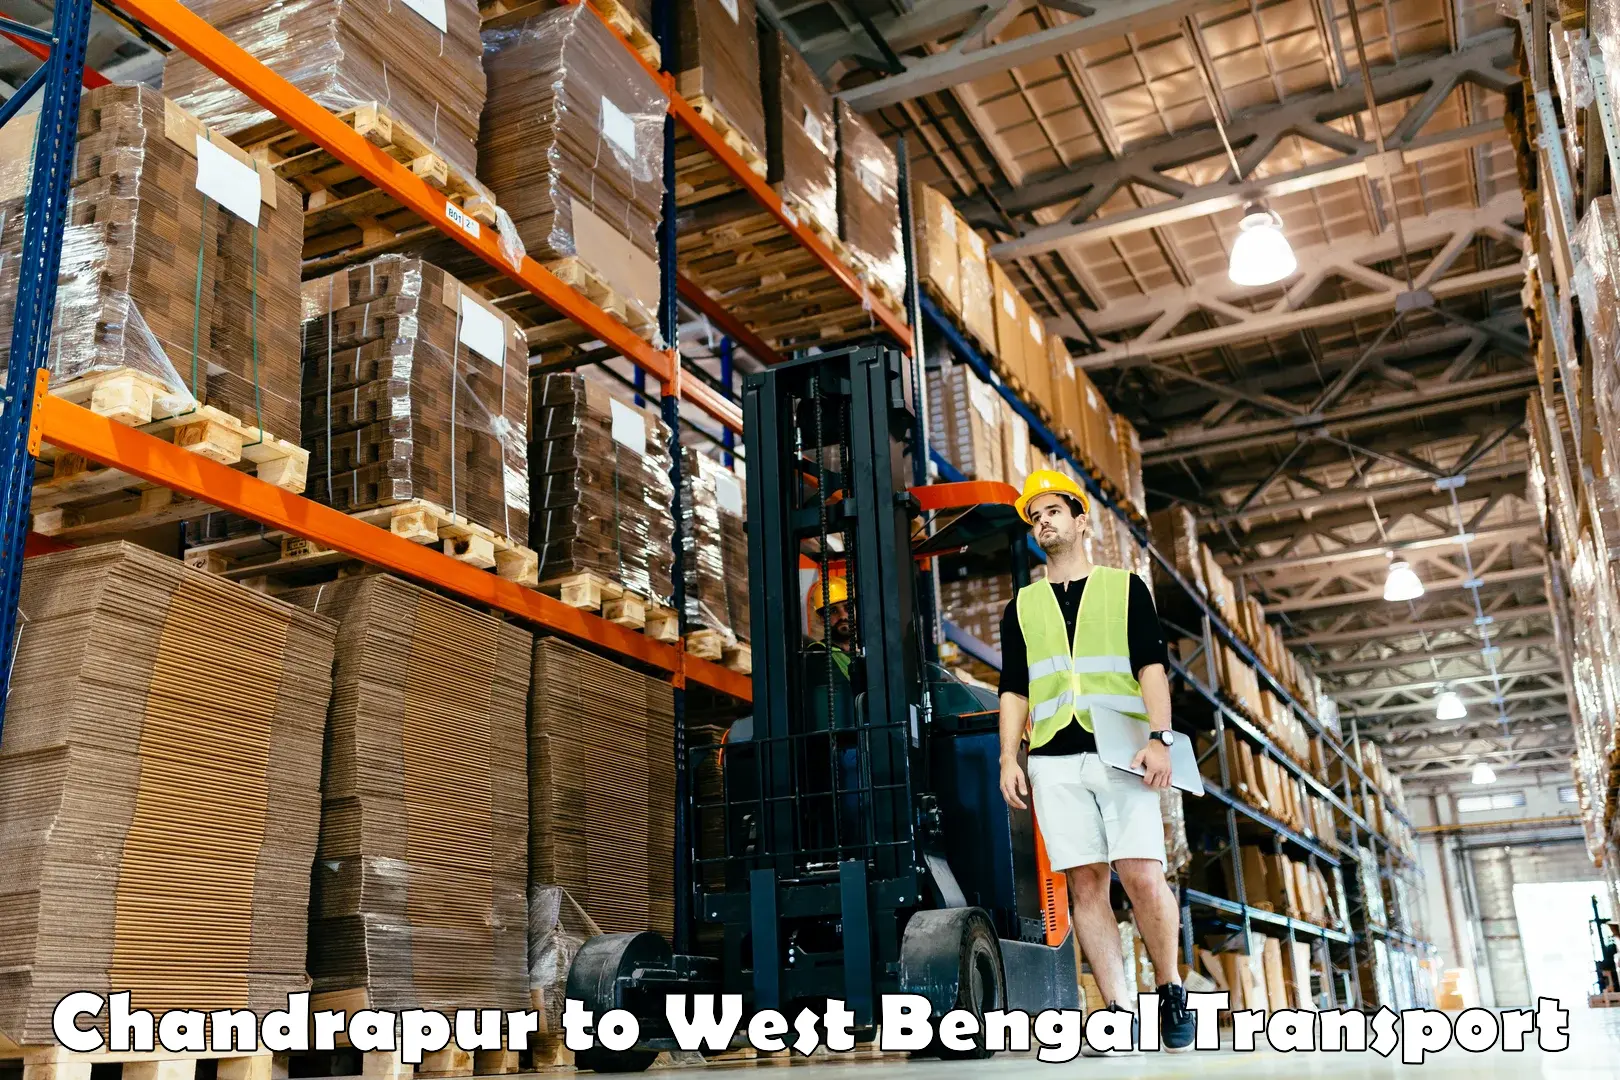 Shipping partner Chandrapur to West Bengal